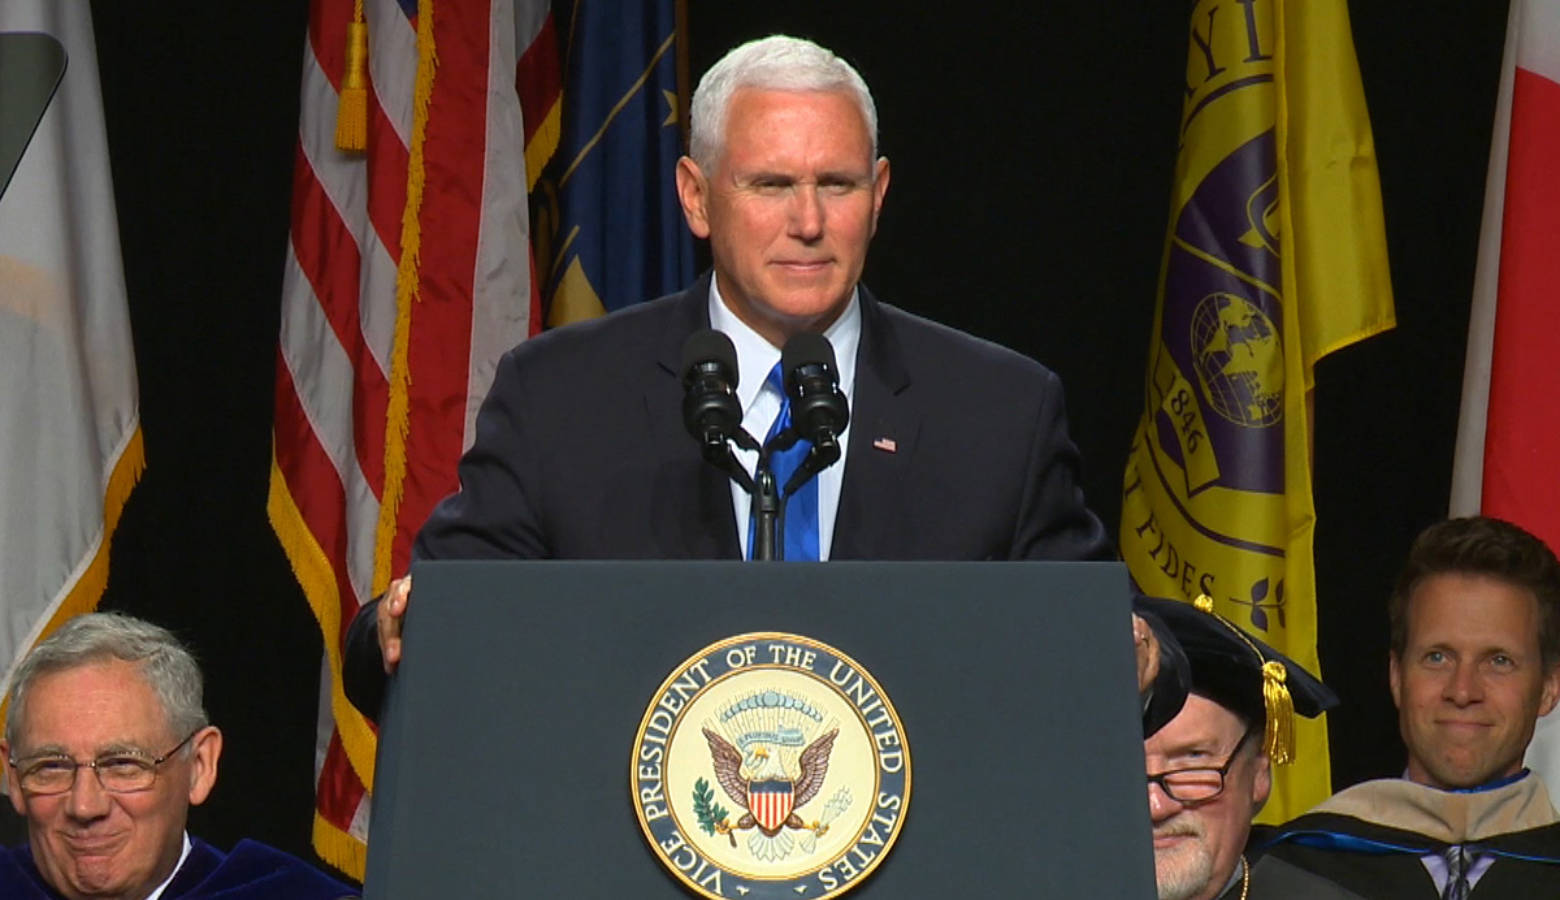 Vice President Mike Pence speaks at Taylor University's commencement. (Courtesy of Taylor University)